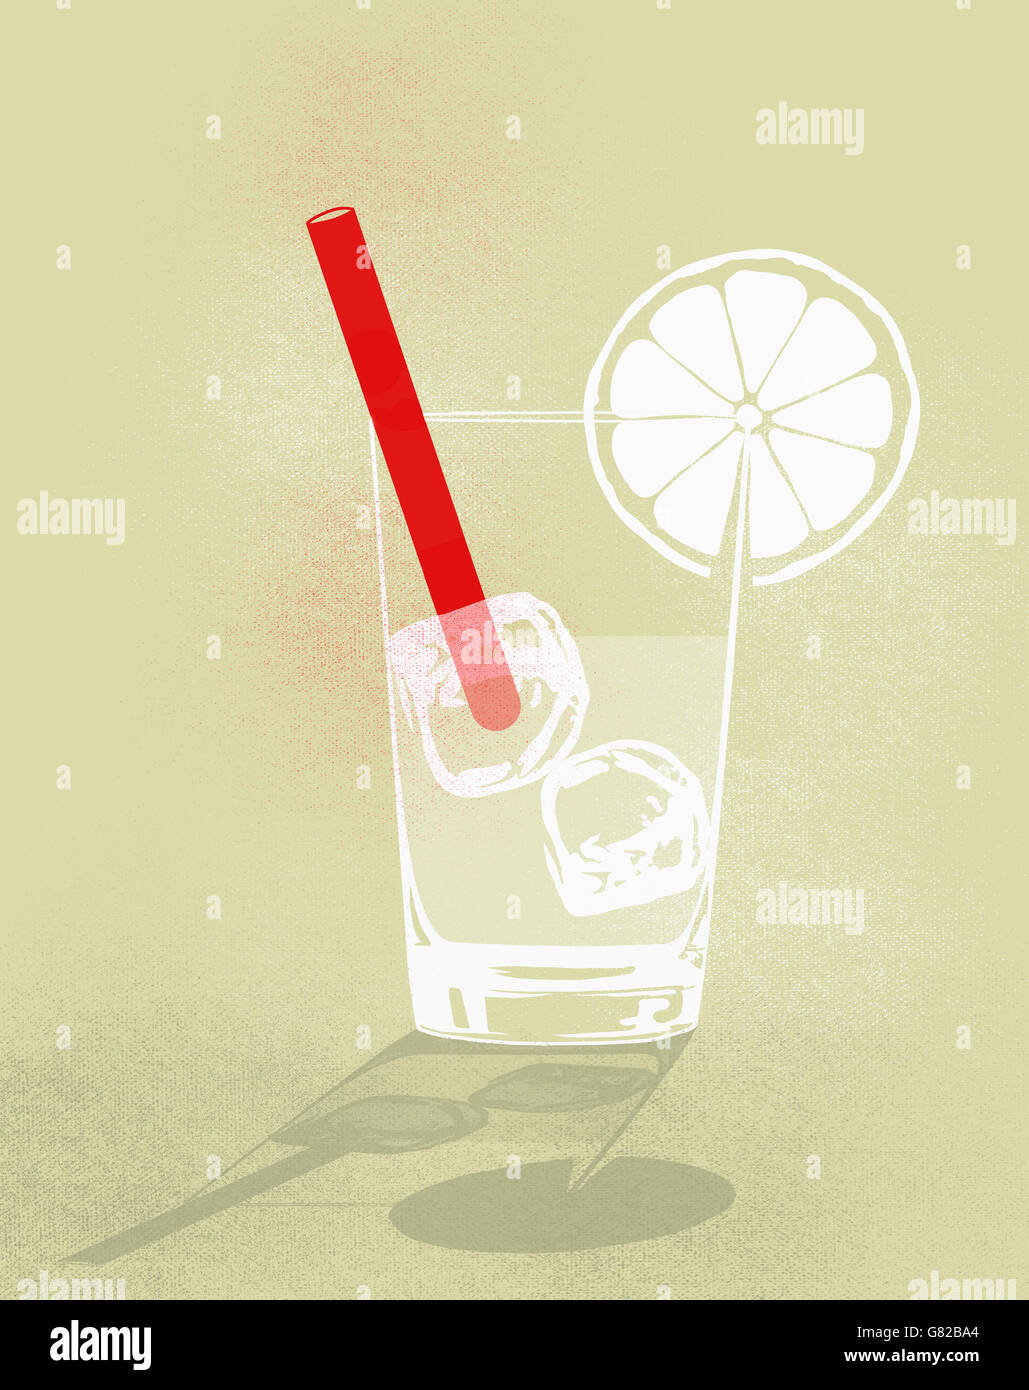 Digital composite image of cold drink against yellow background Stock Photo